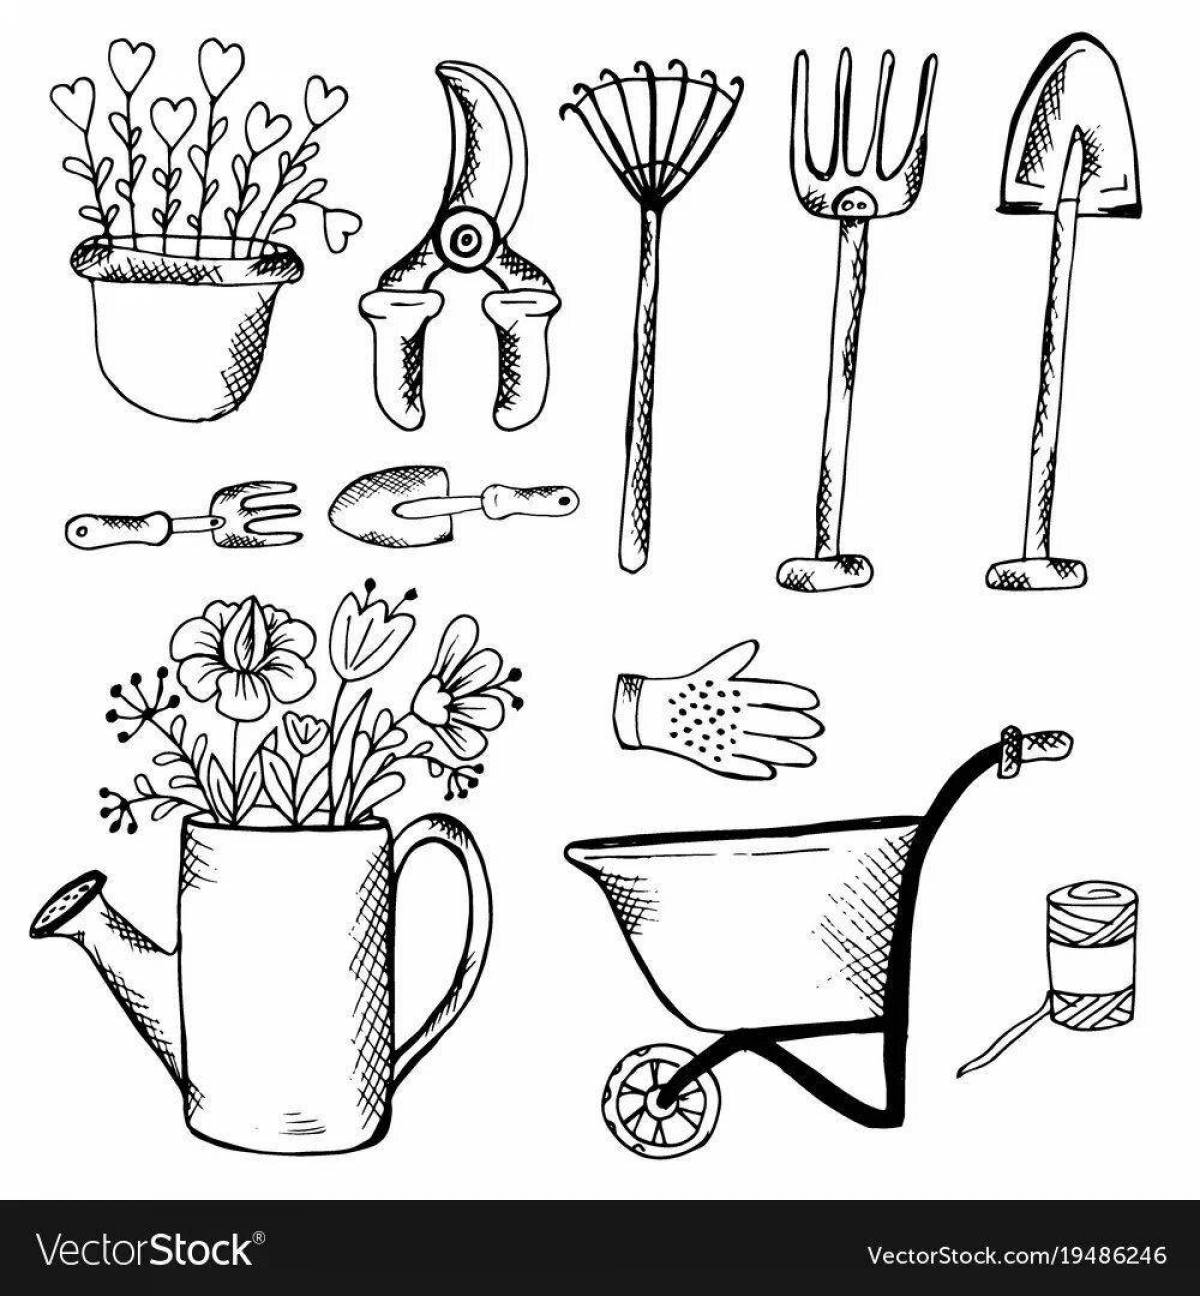 Exciting garden tools coloring page